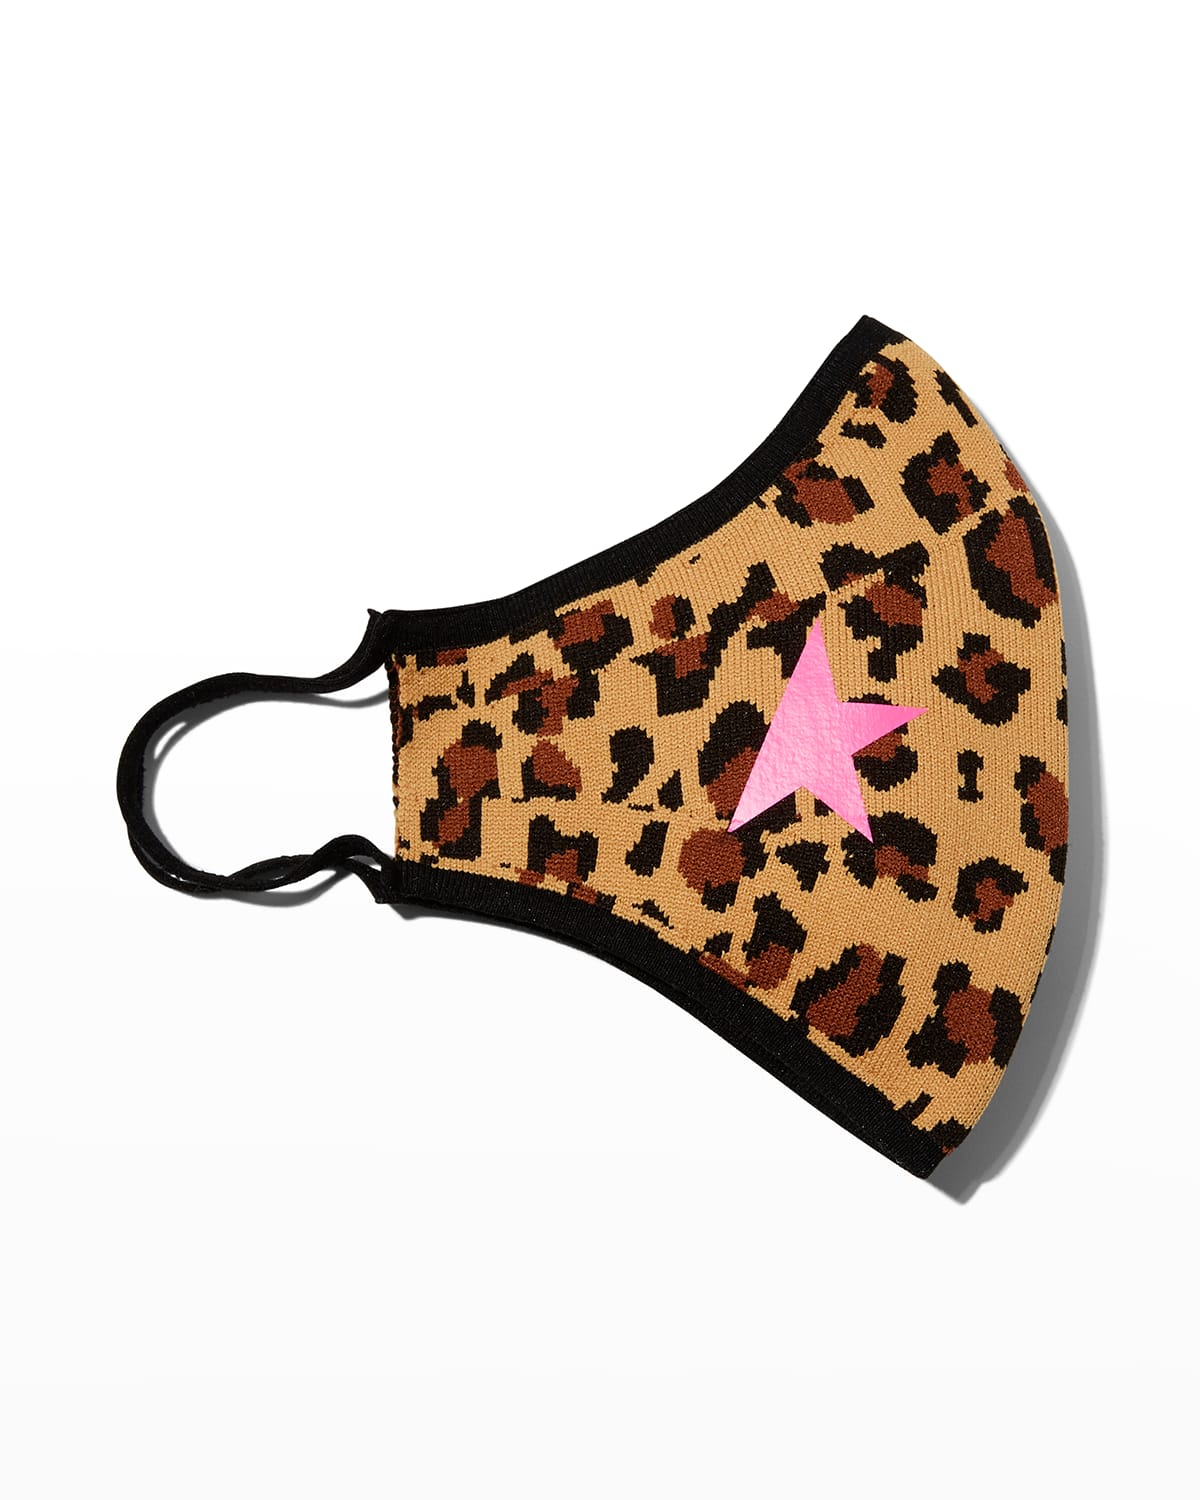 Leopard-Print Star Reusable Face Mask Covering